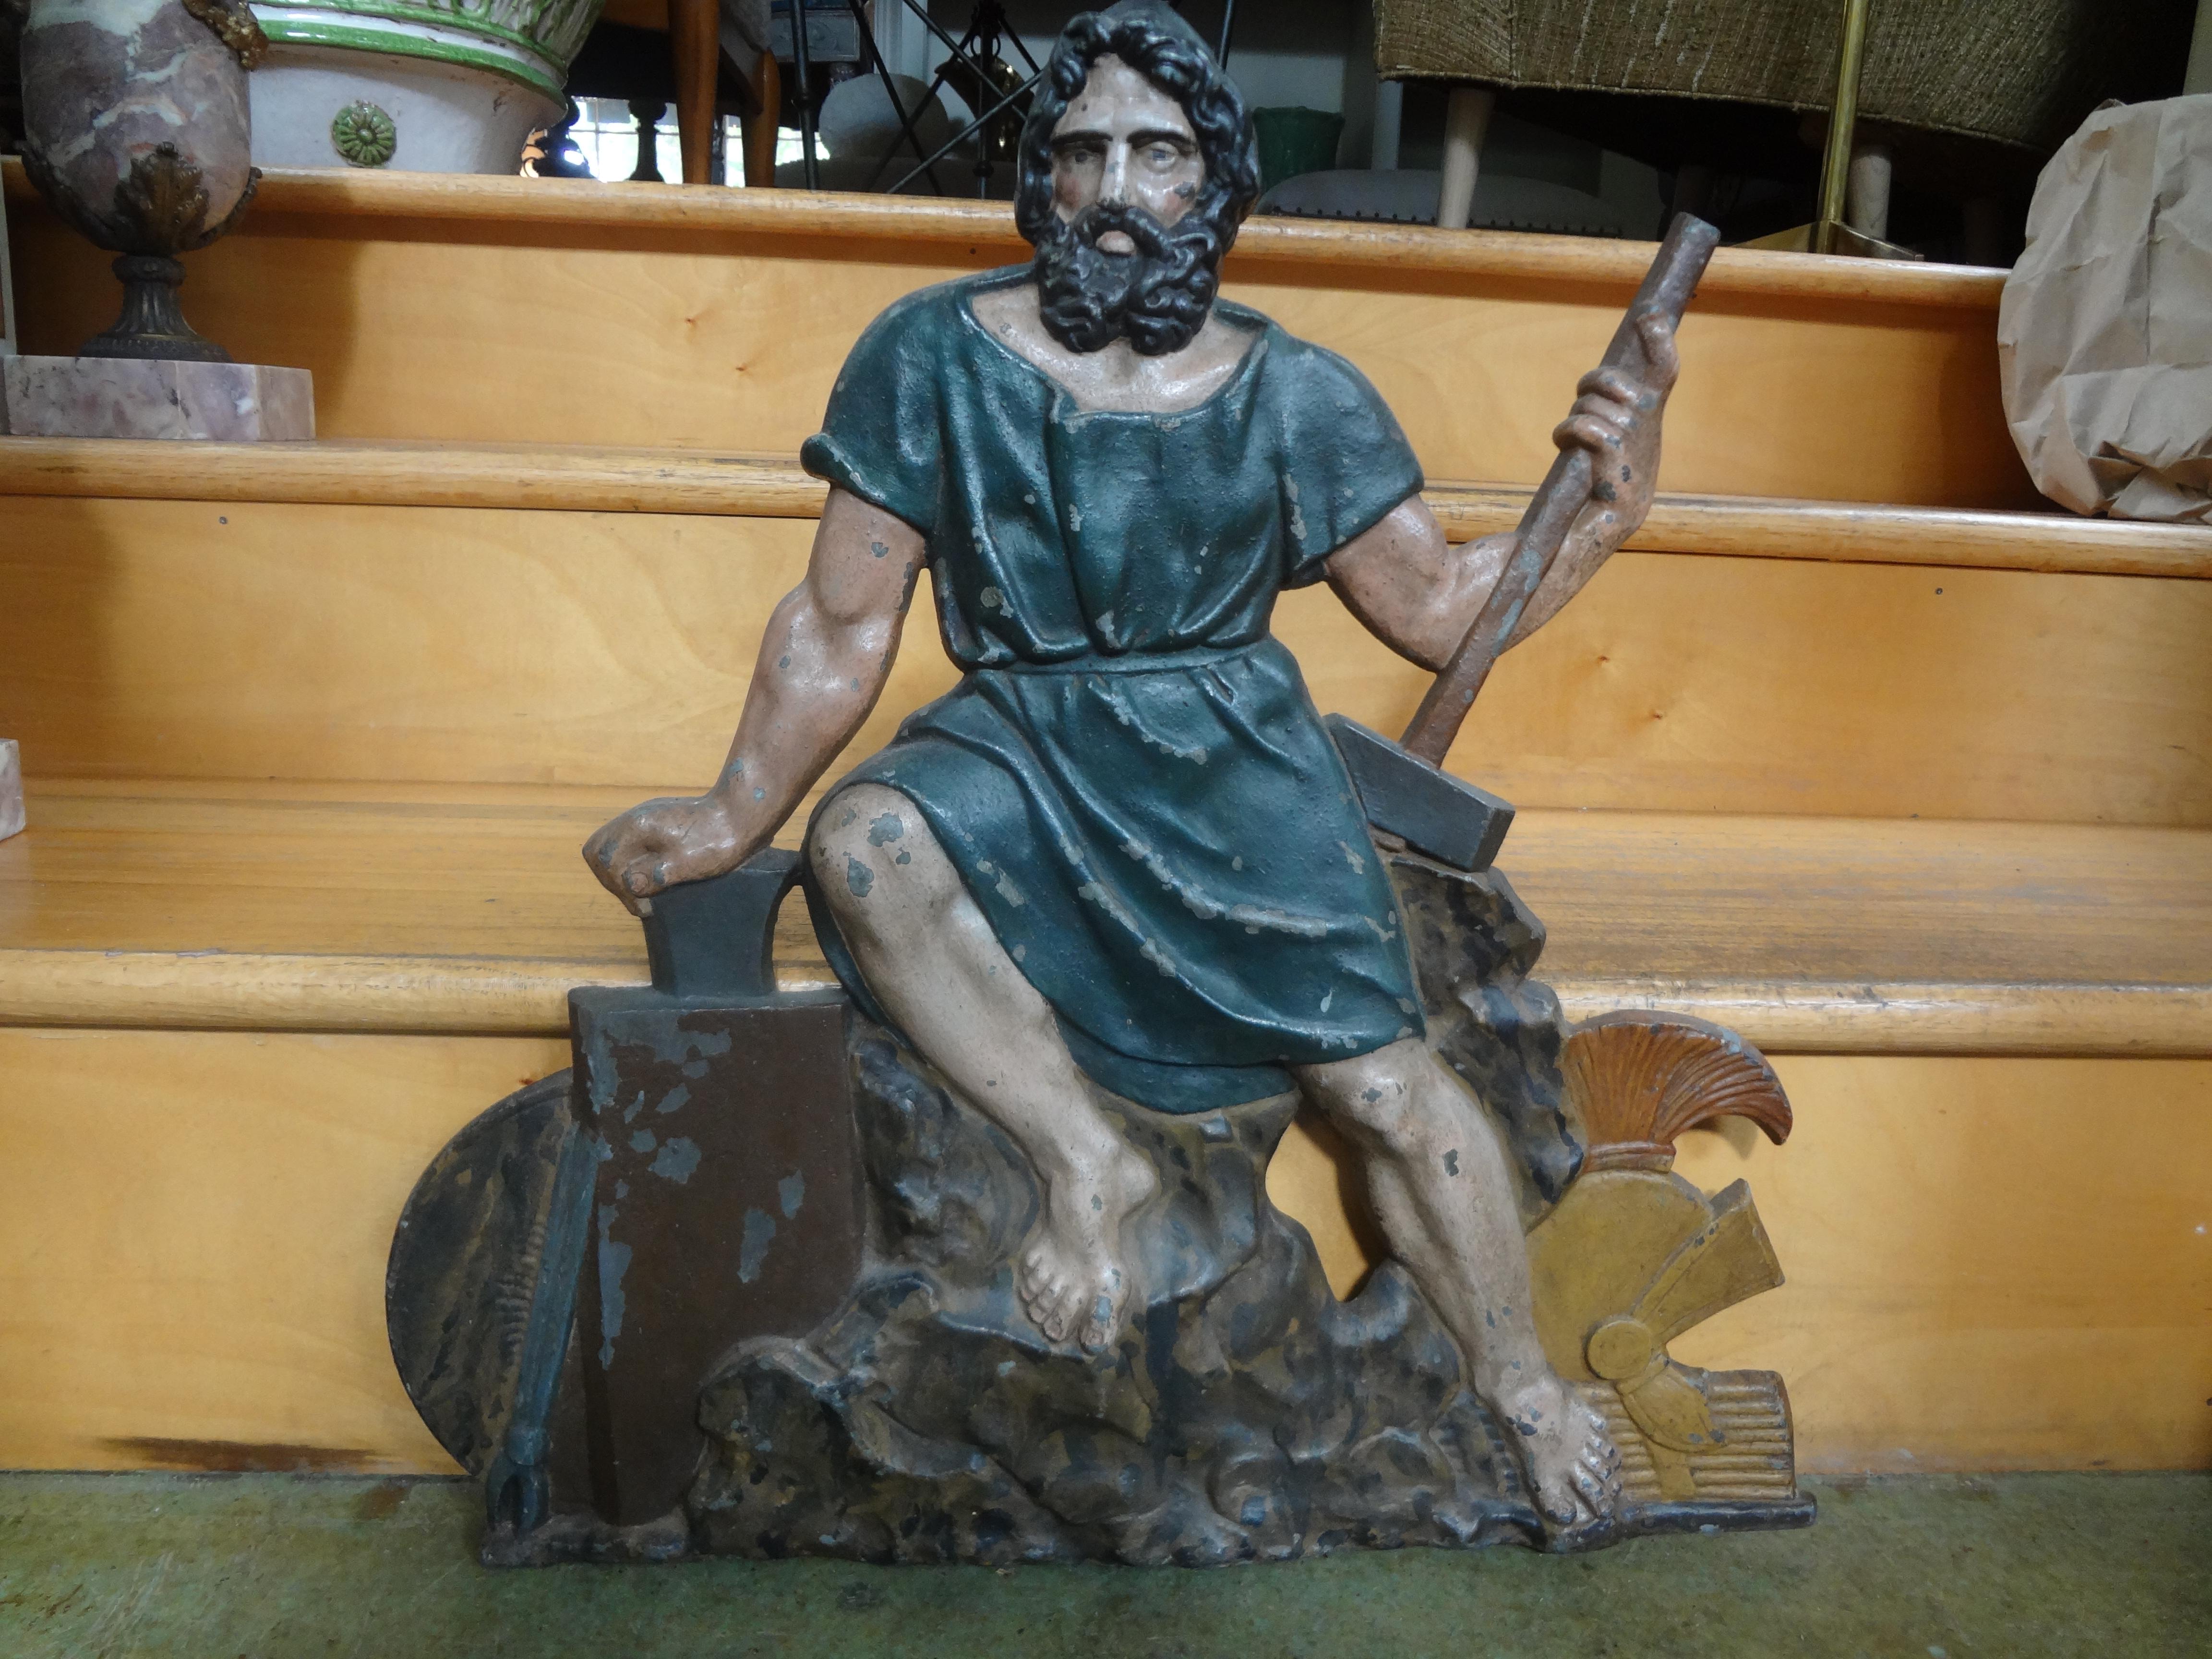 19th century French cast iron trade sign. This French polychrome iron trade sign depicts a strong handsome male figure and most likely was from a French iron foundry. This great antique French trade sign makes a perfect wall-mounted sculpture.